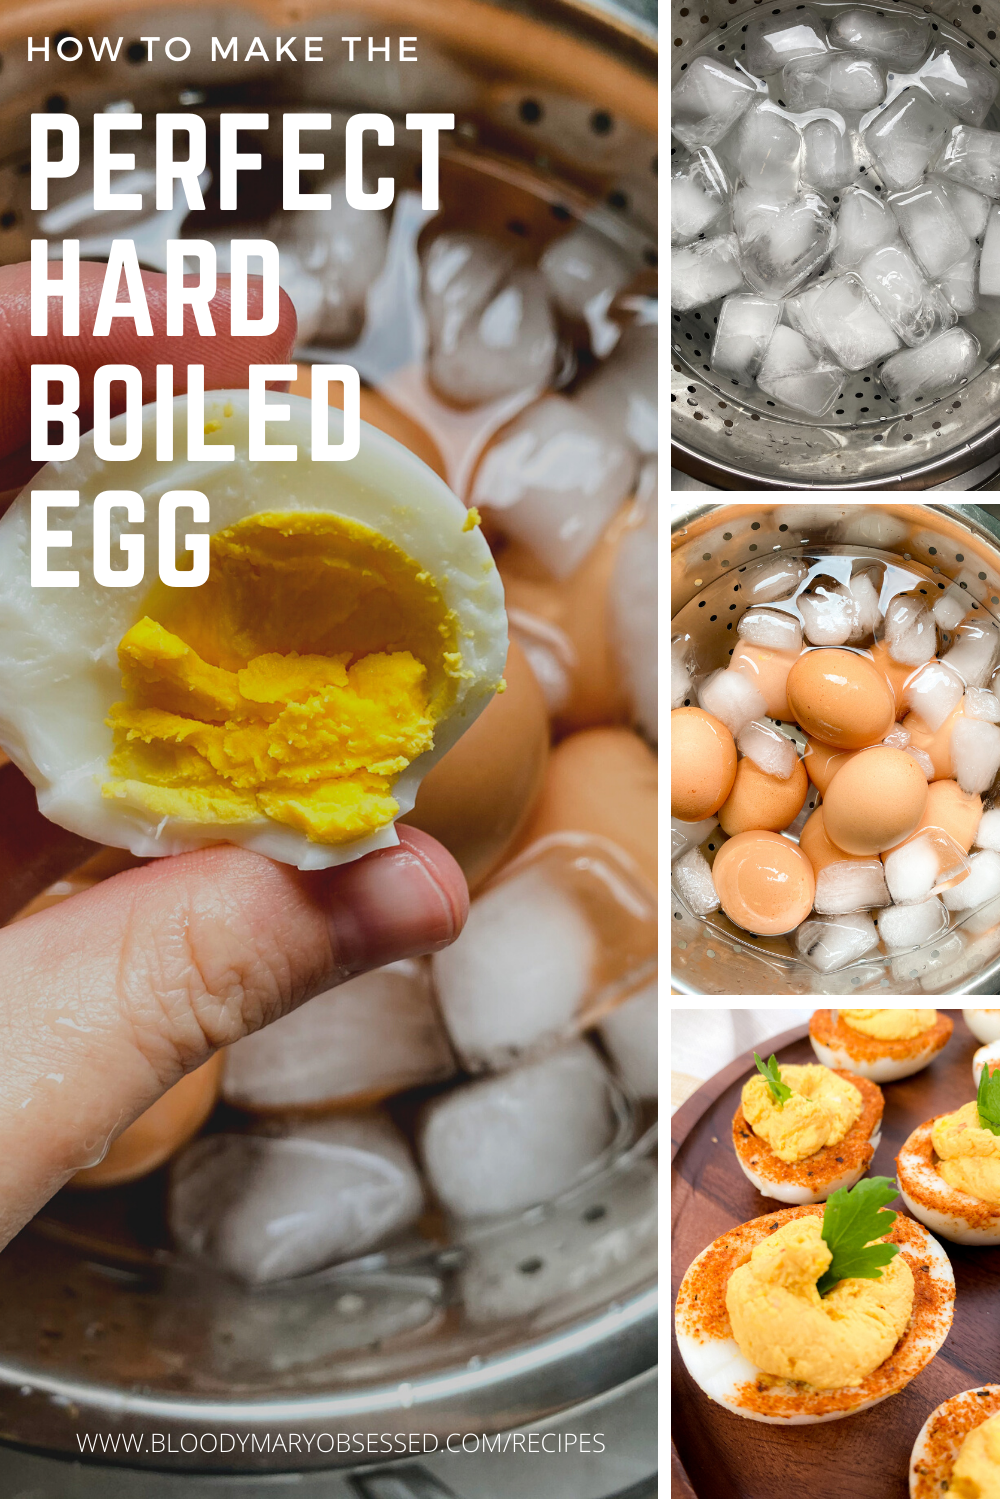 how to make the perfect hard boiled egg and bloody mary deviled egg recipe bloody mary obsessed.png